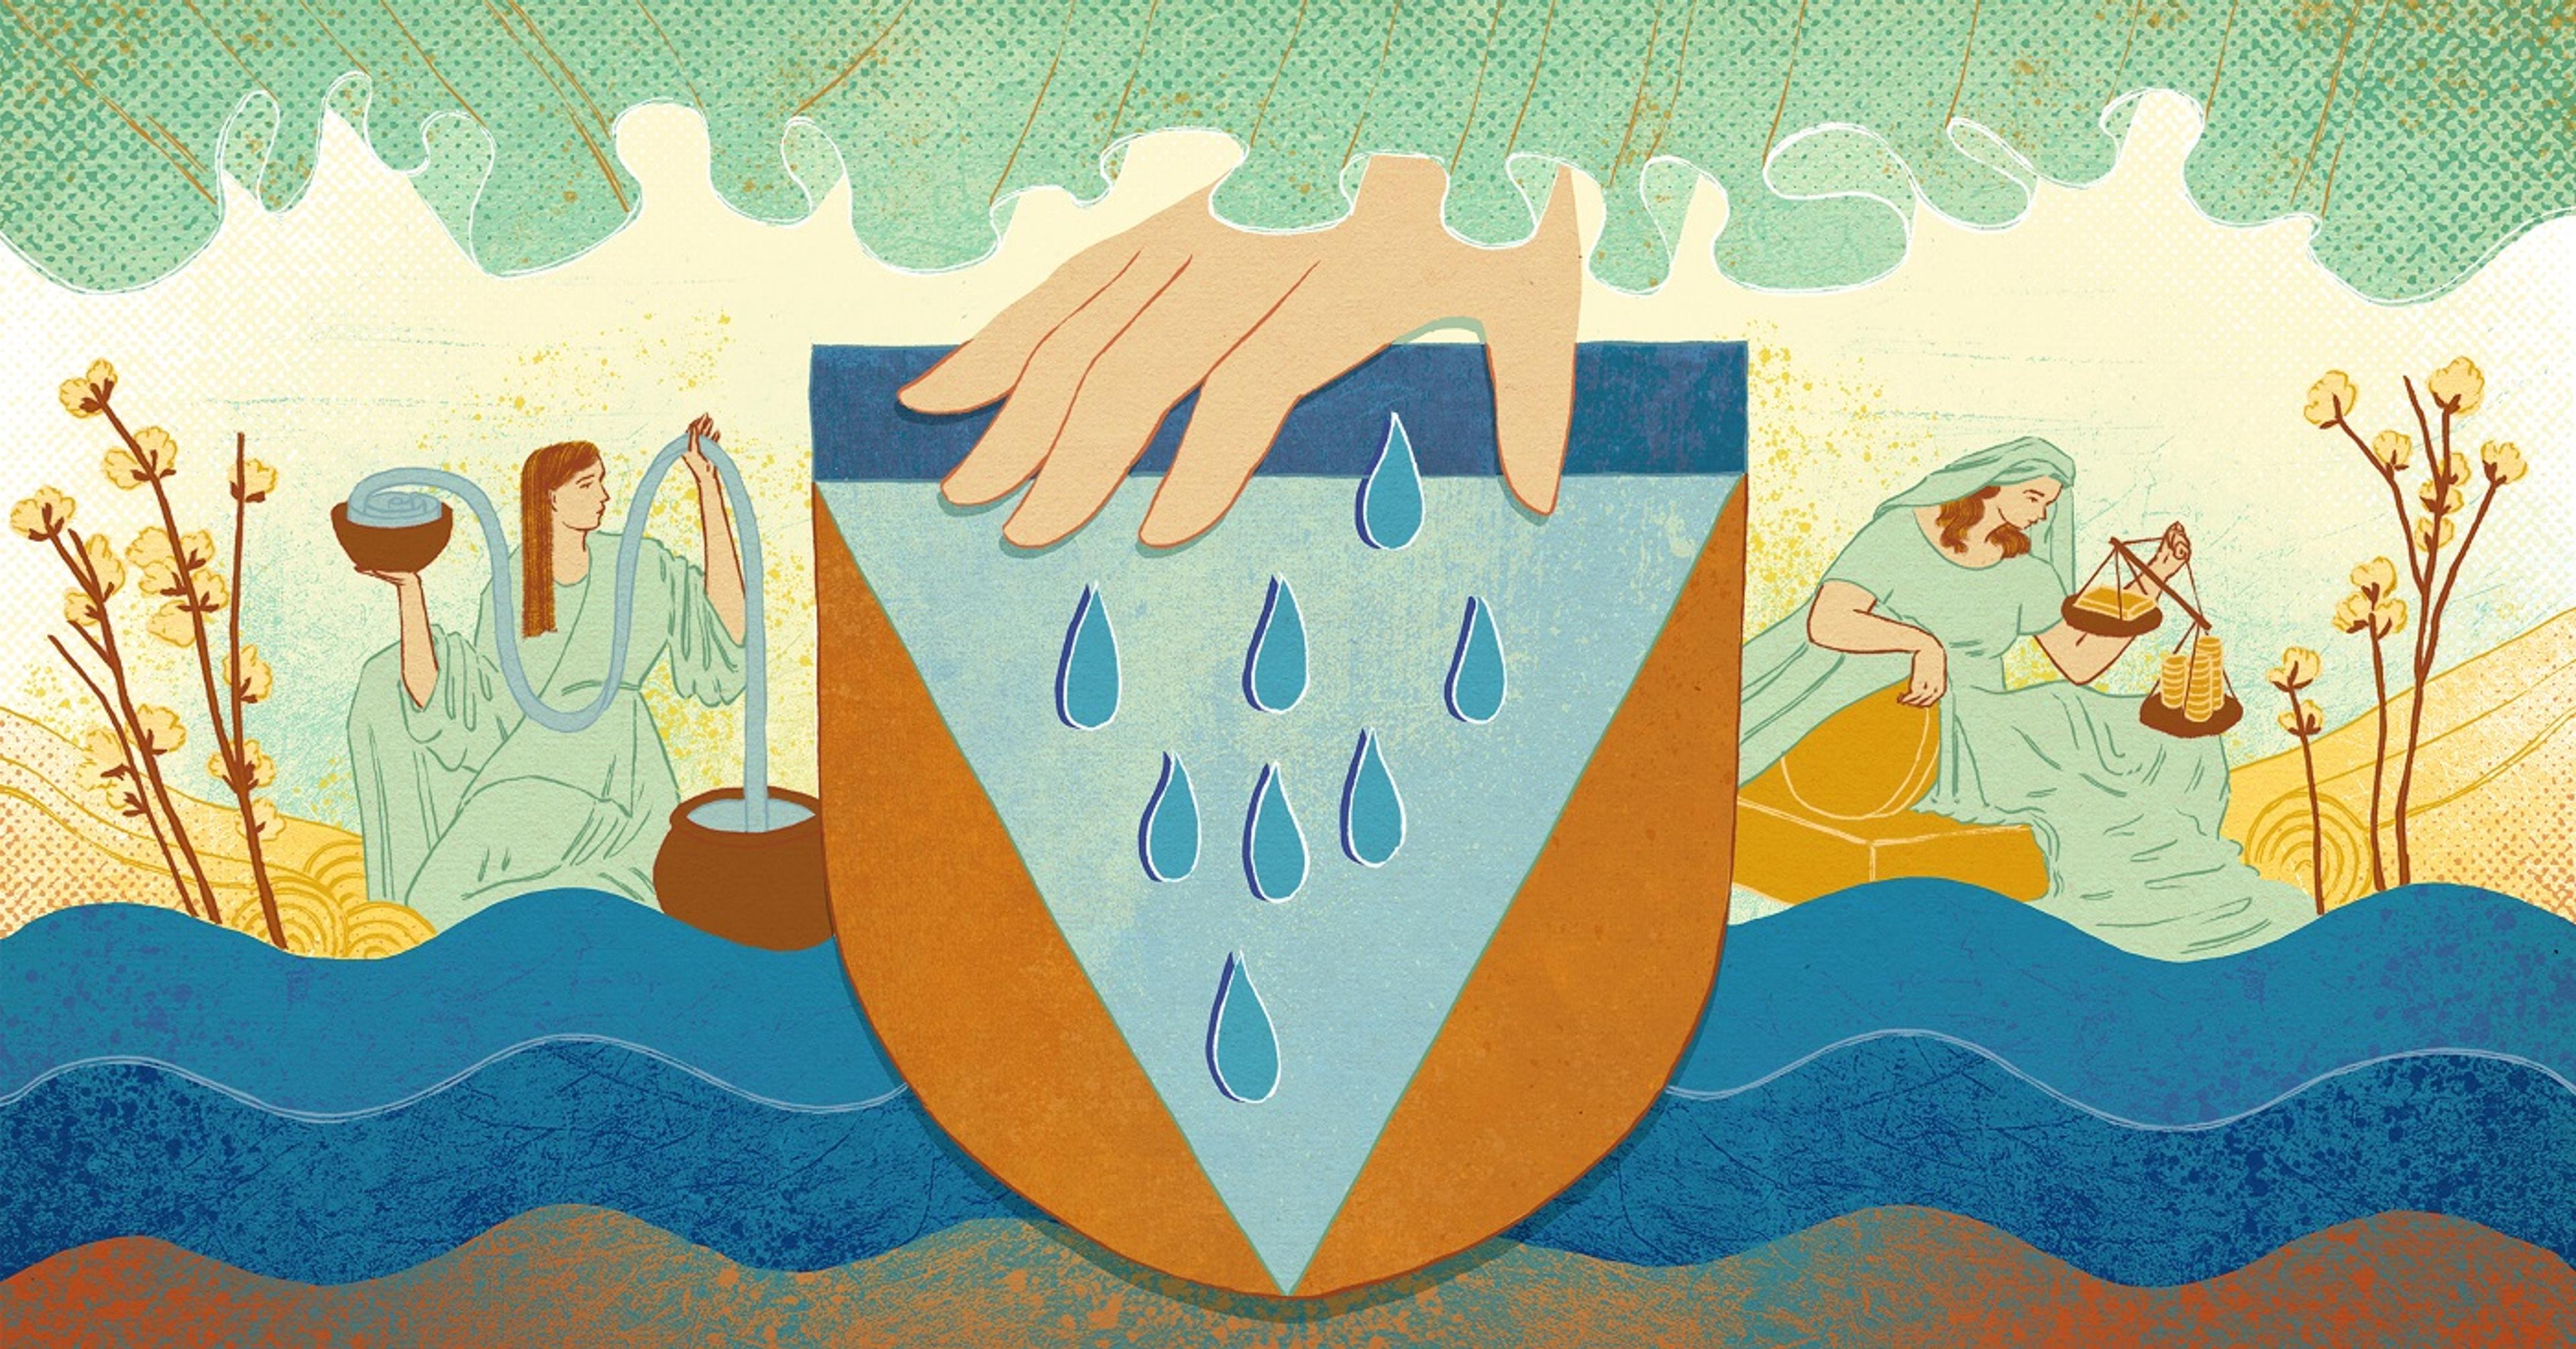 Illustration of a crest showing a large hand sprinkling drops of water. A person on one side holds a coil of fabric and a woman on the right holds scales holding weights and coins